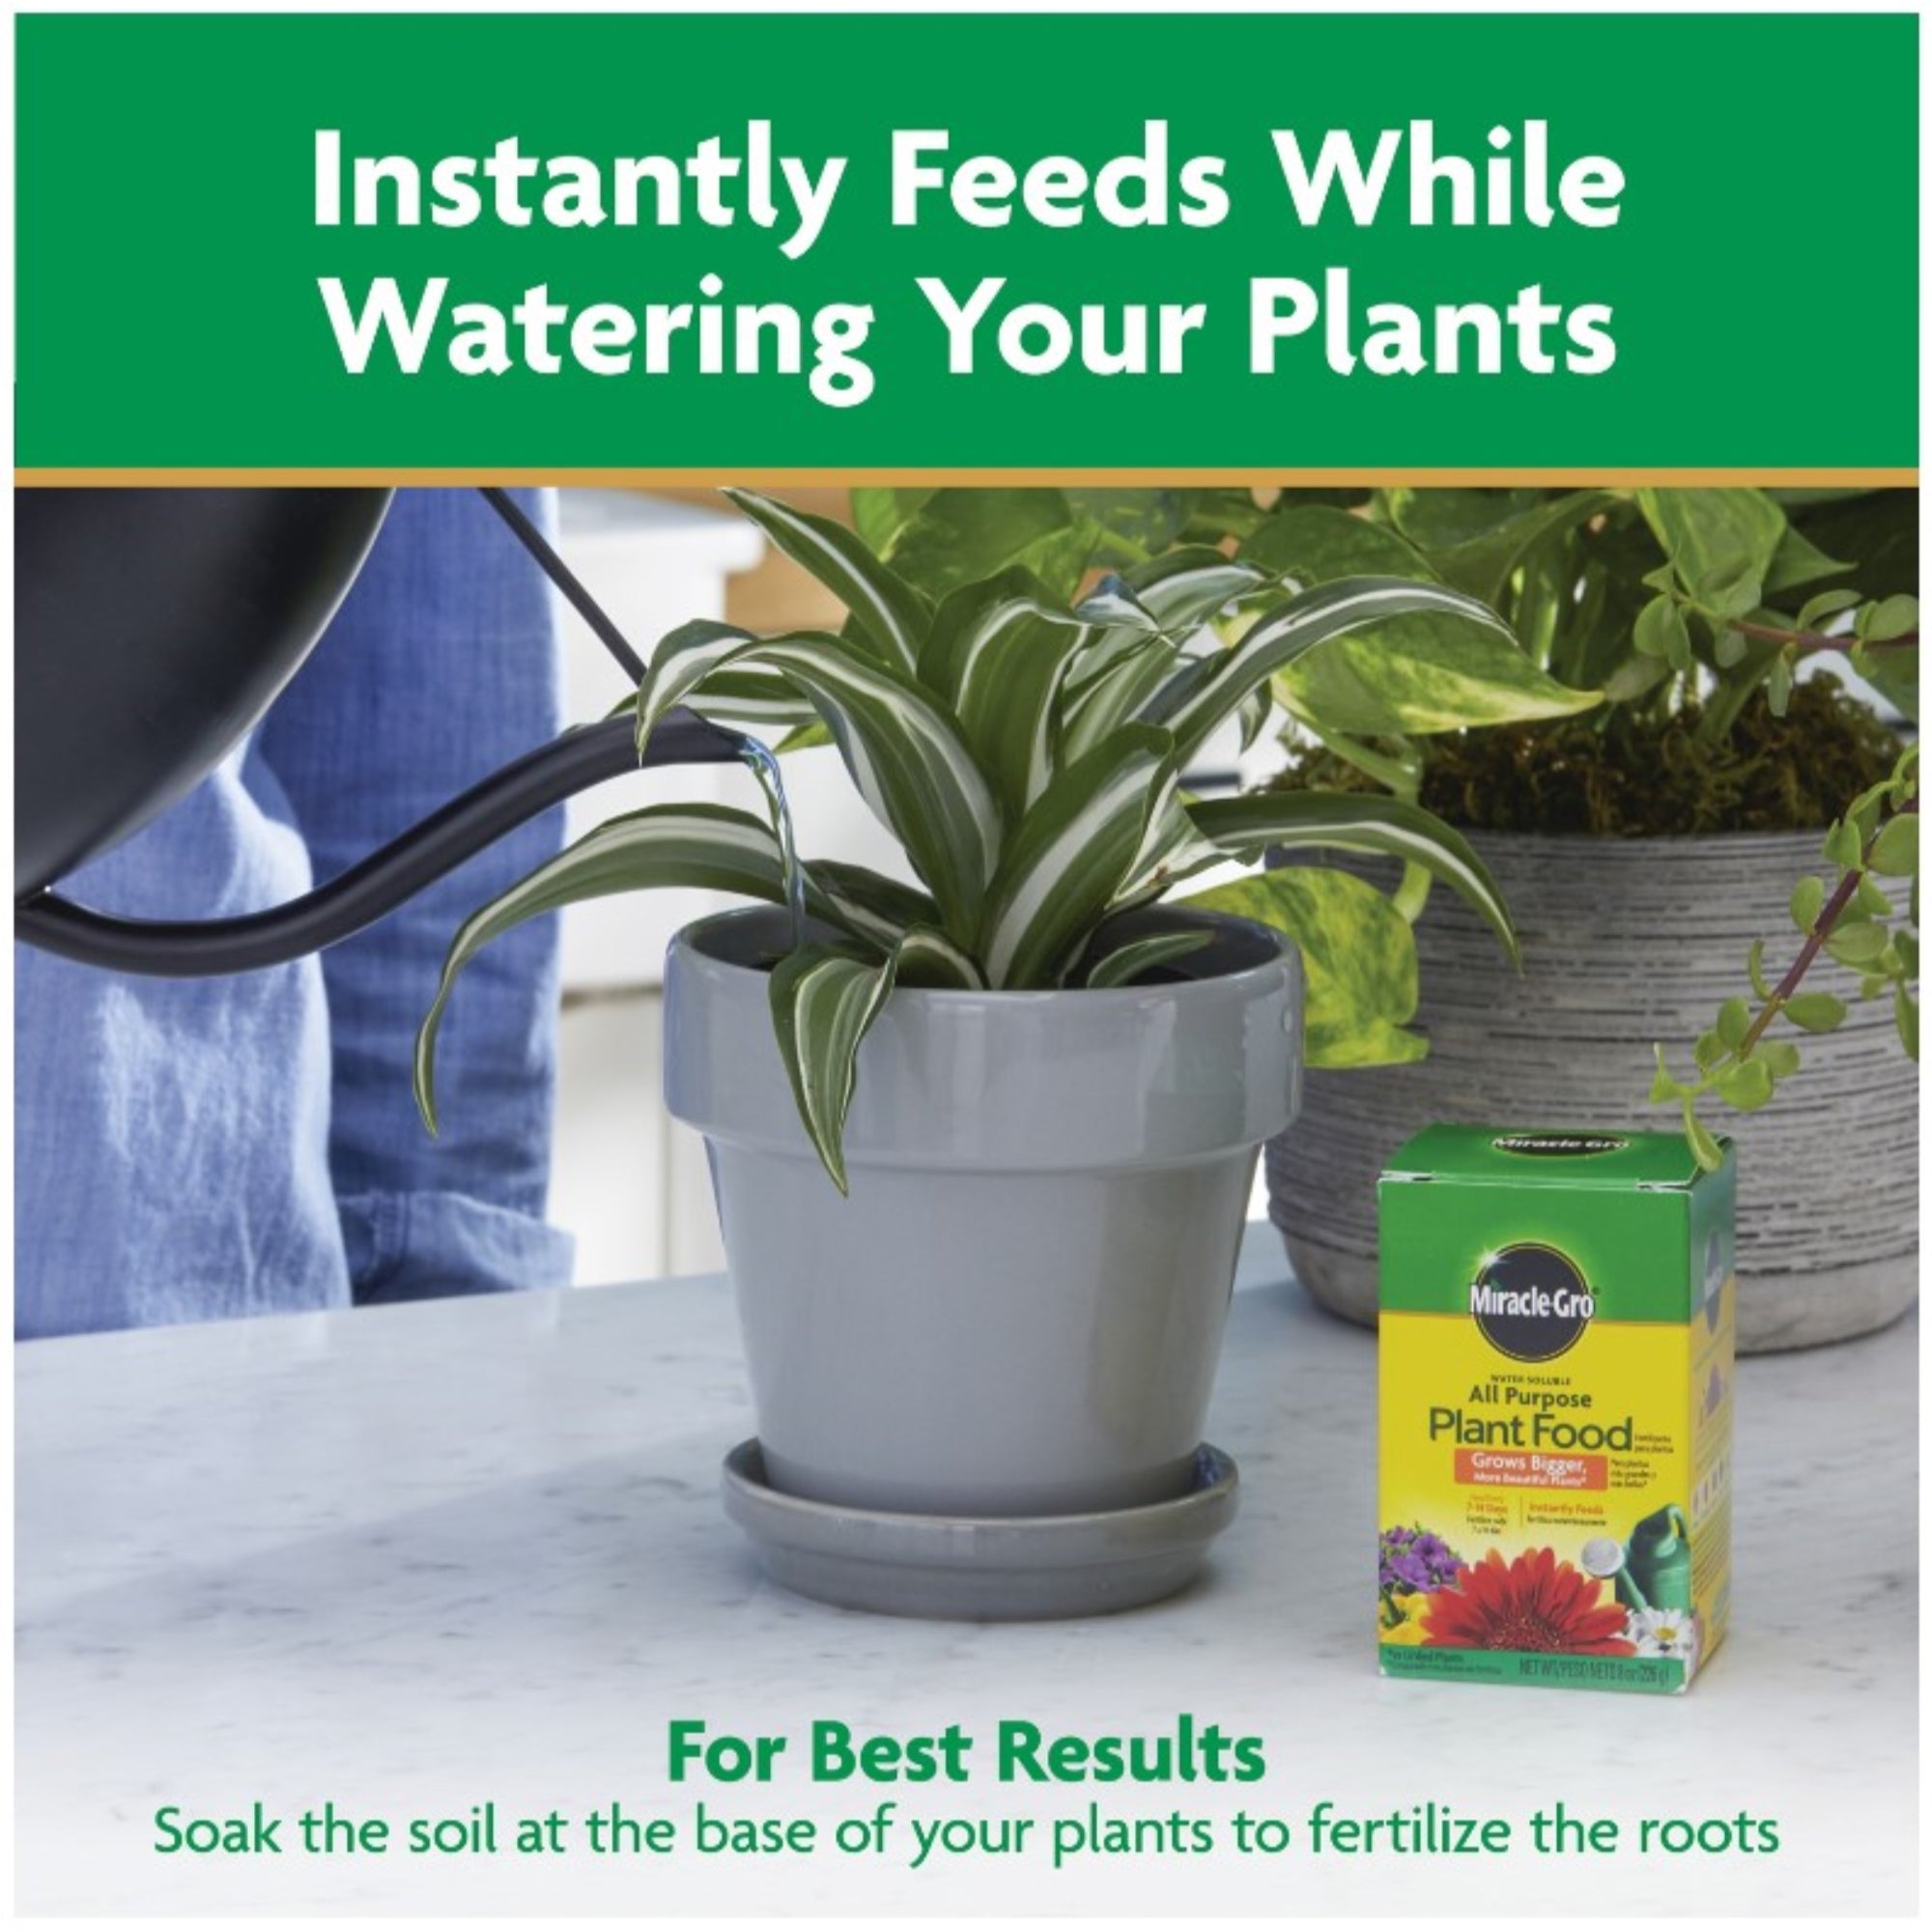 Miracle-Gro Water Soluble All Purpose Plant Food, 8 oz